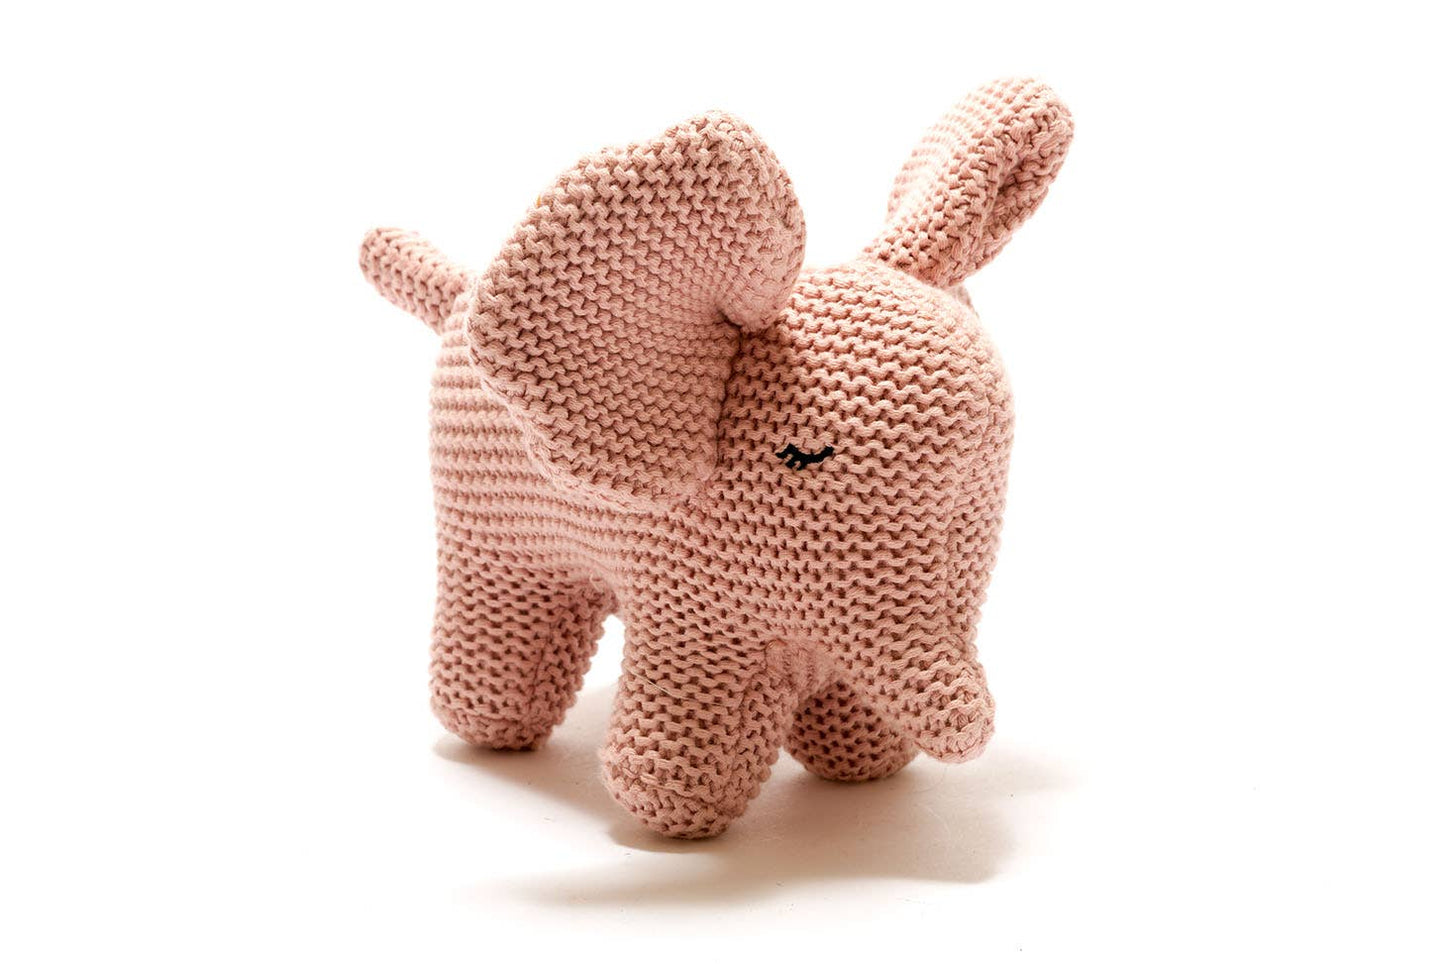 Chunky Knit Organic Small Baby Elephant Plush Toy in Pink